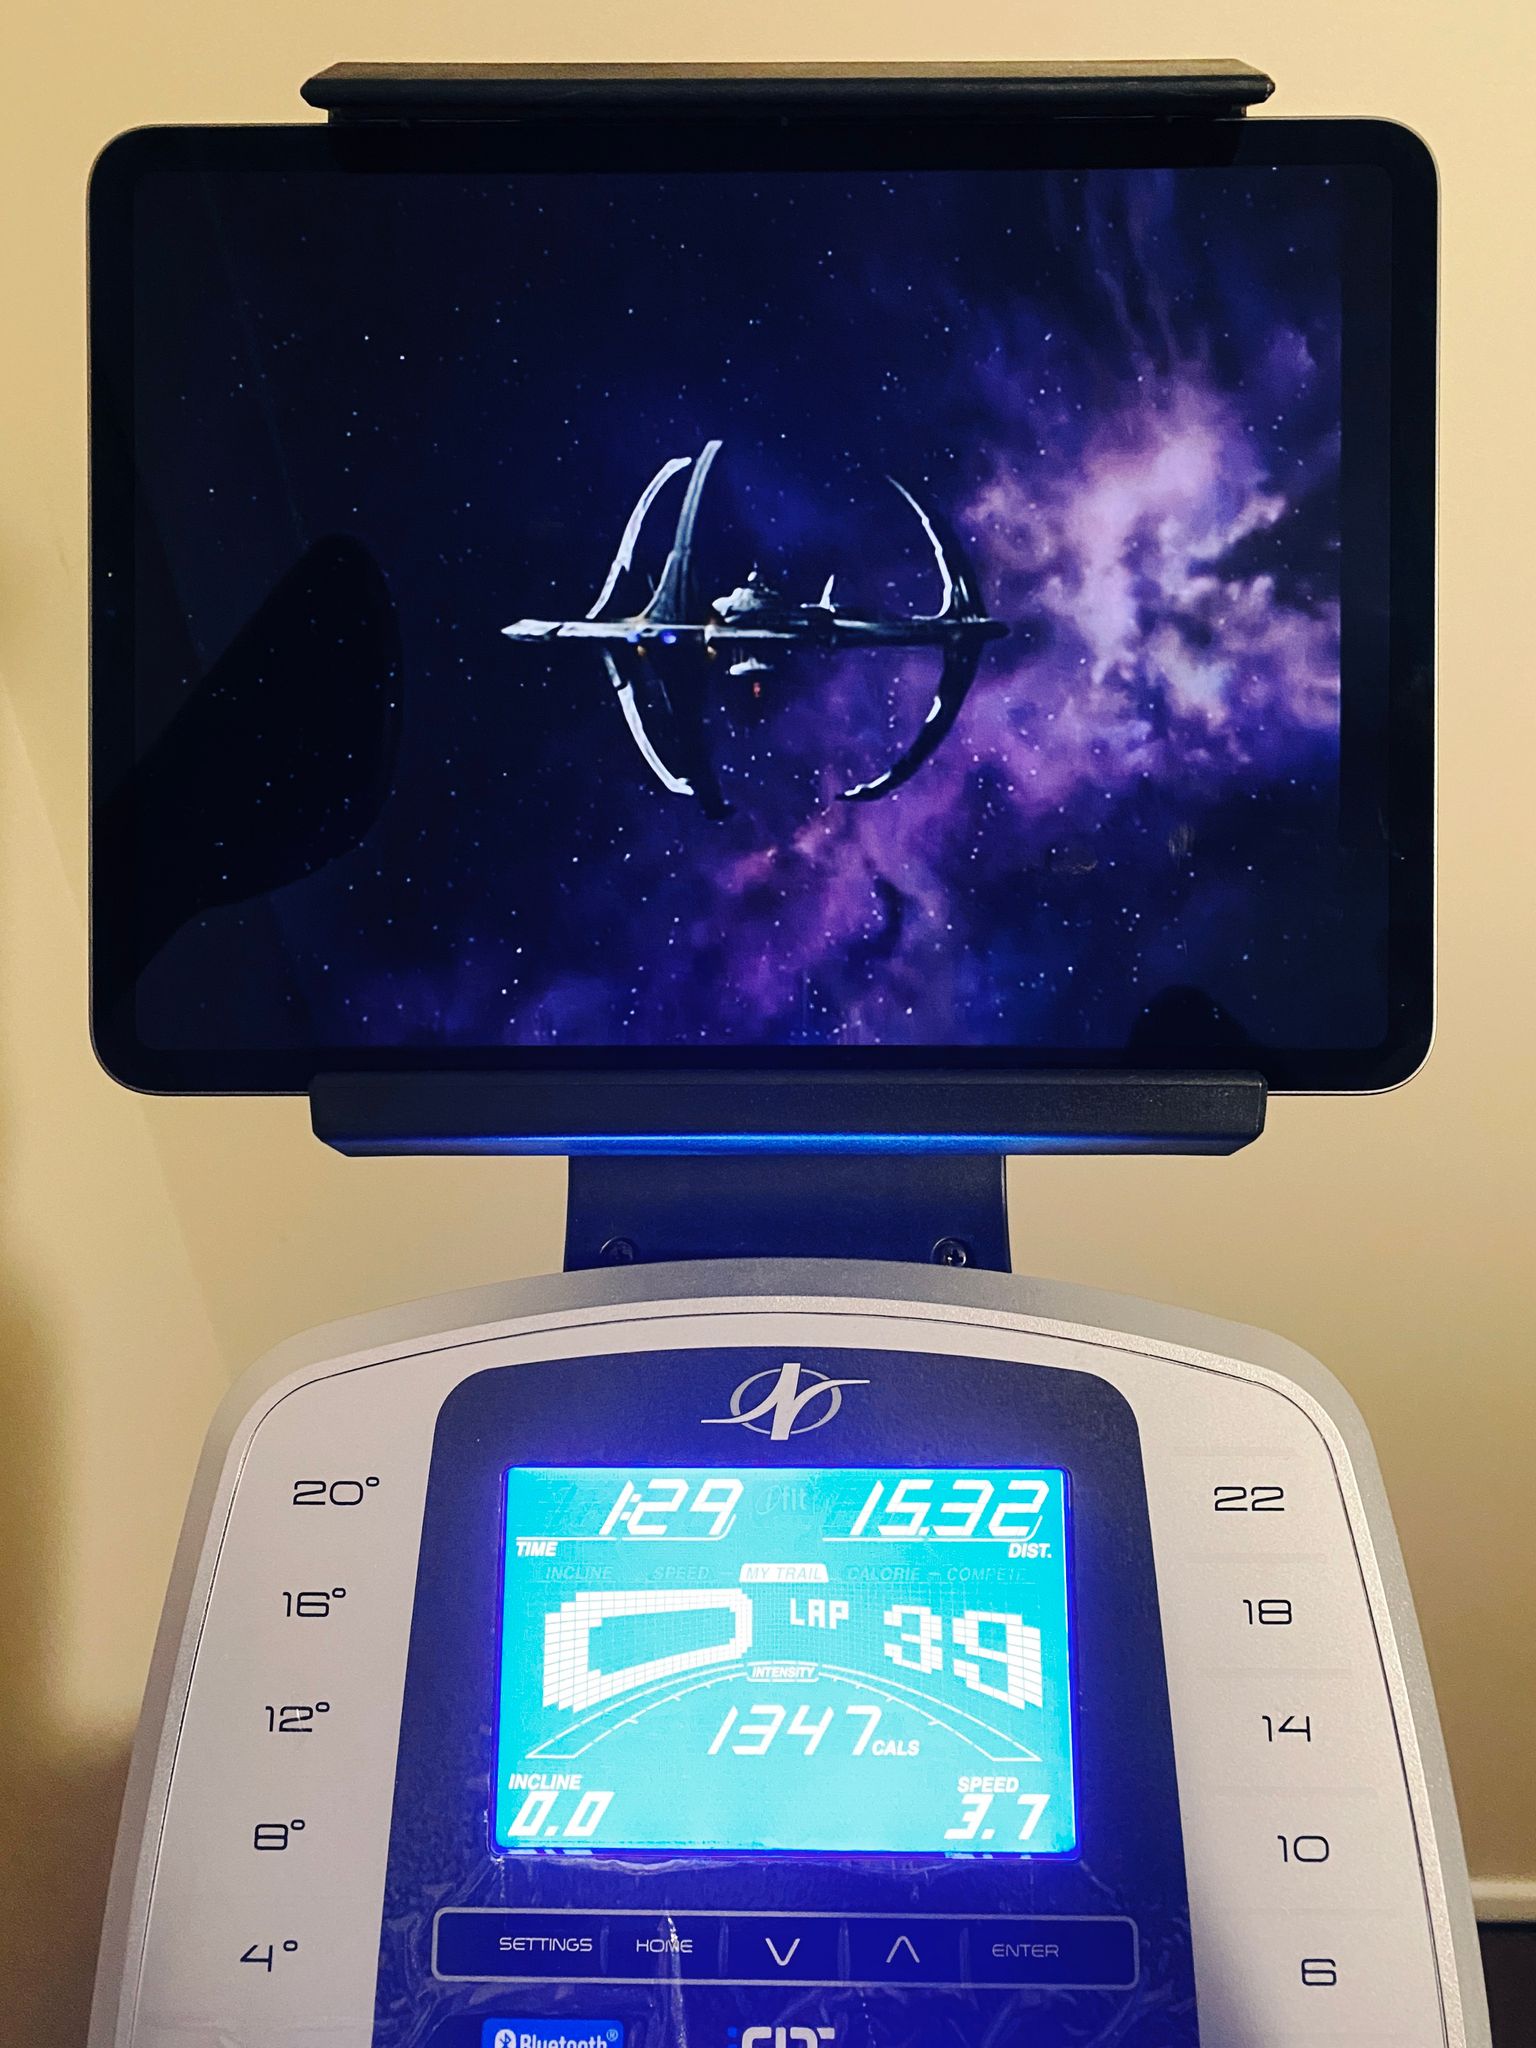 A photo of the elliptical showing 1349 calories burnt in an hour twenty-nine, and the iPad is paused at the very end of the last episode of Deep Space Nine, with the station itself slowly receding into the distance and a deep purple nebula behind it.